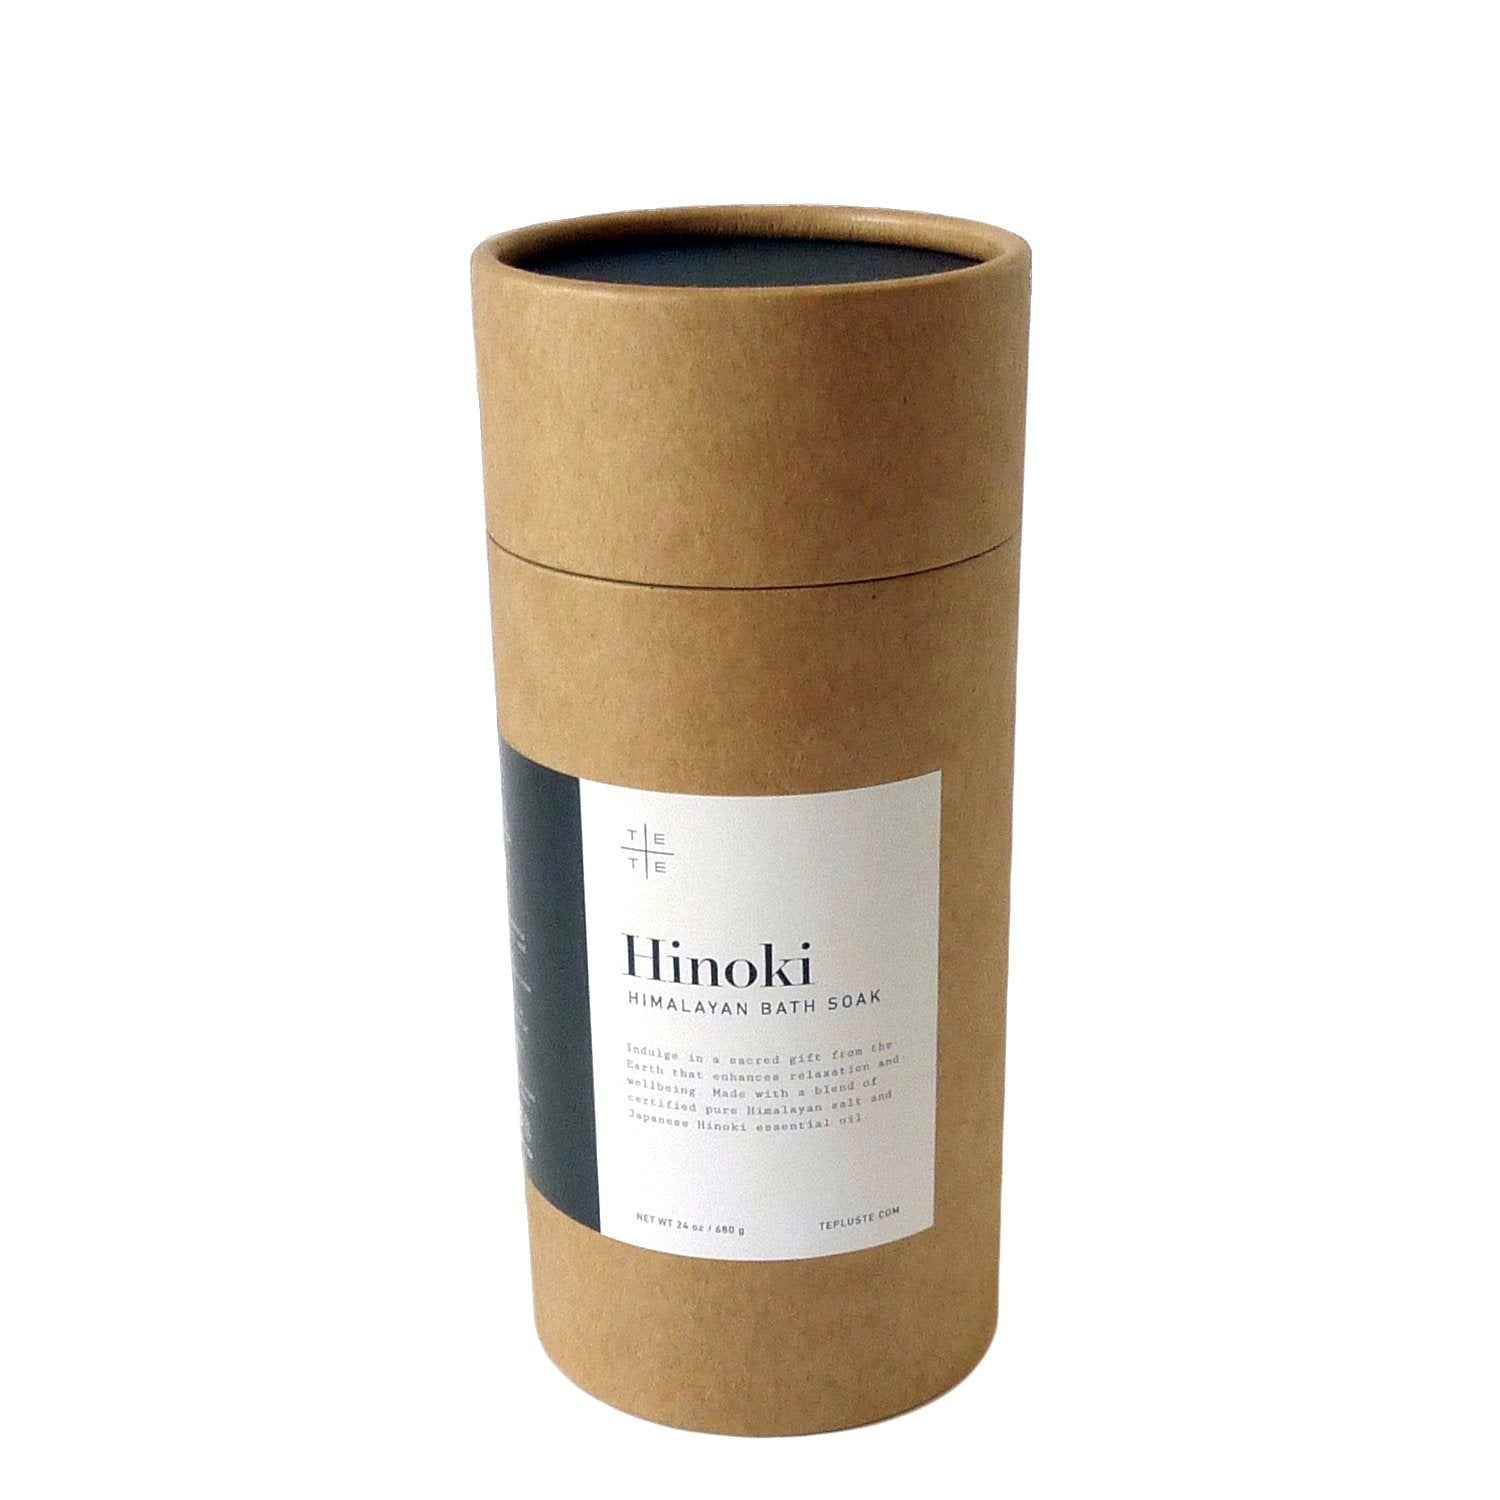 Hinoki Himalayan Bath Soak - te+te (te plus te) Made with a blend of certified pure Himalayan salt and Hinoki essential oil. Now it comes with a mix of three different sizes of salt crystals for longer lasting hinoki aroma.